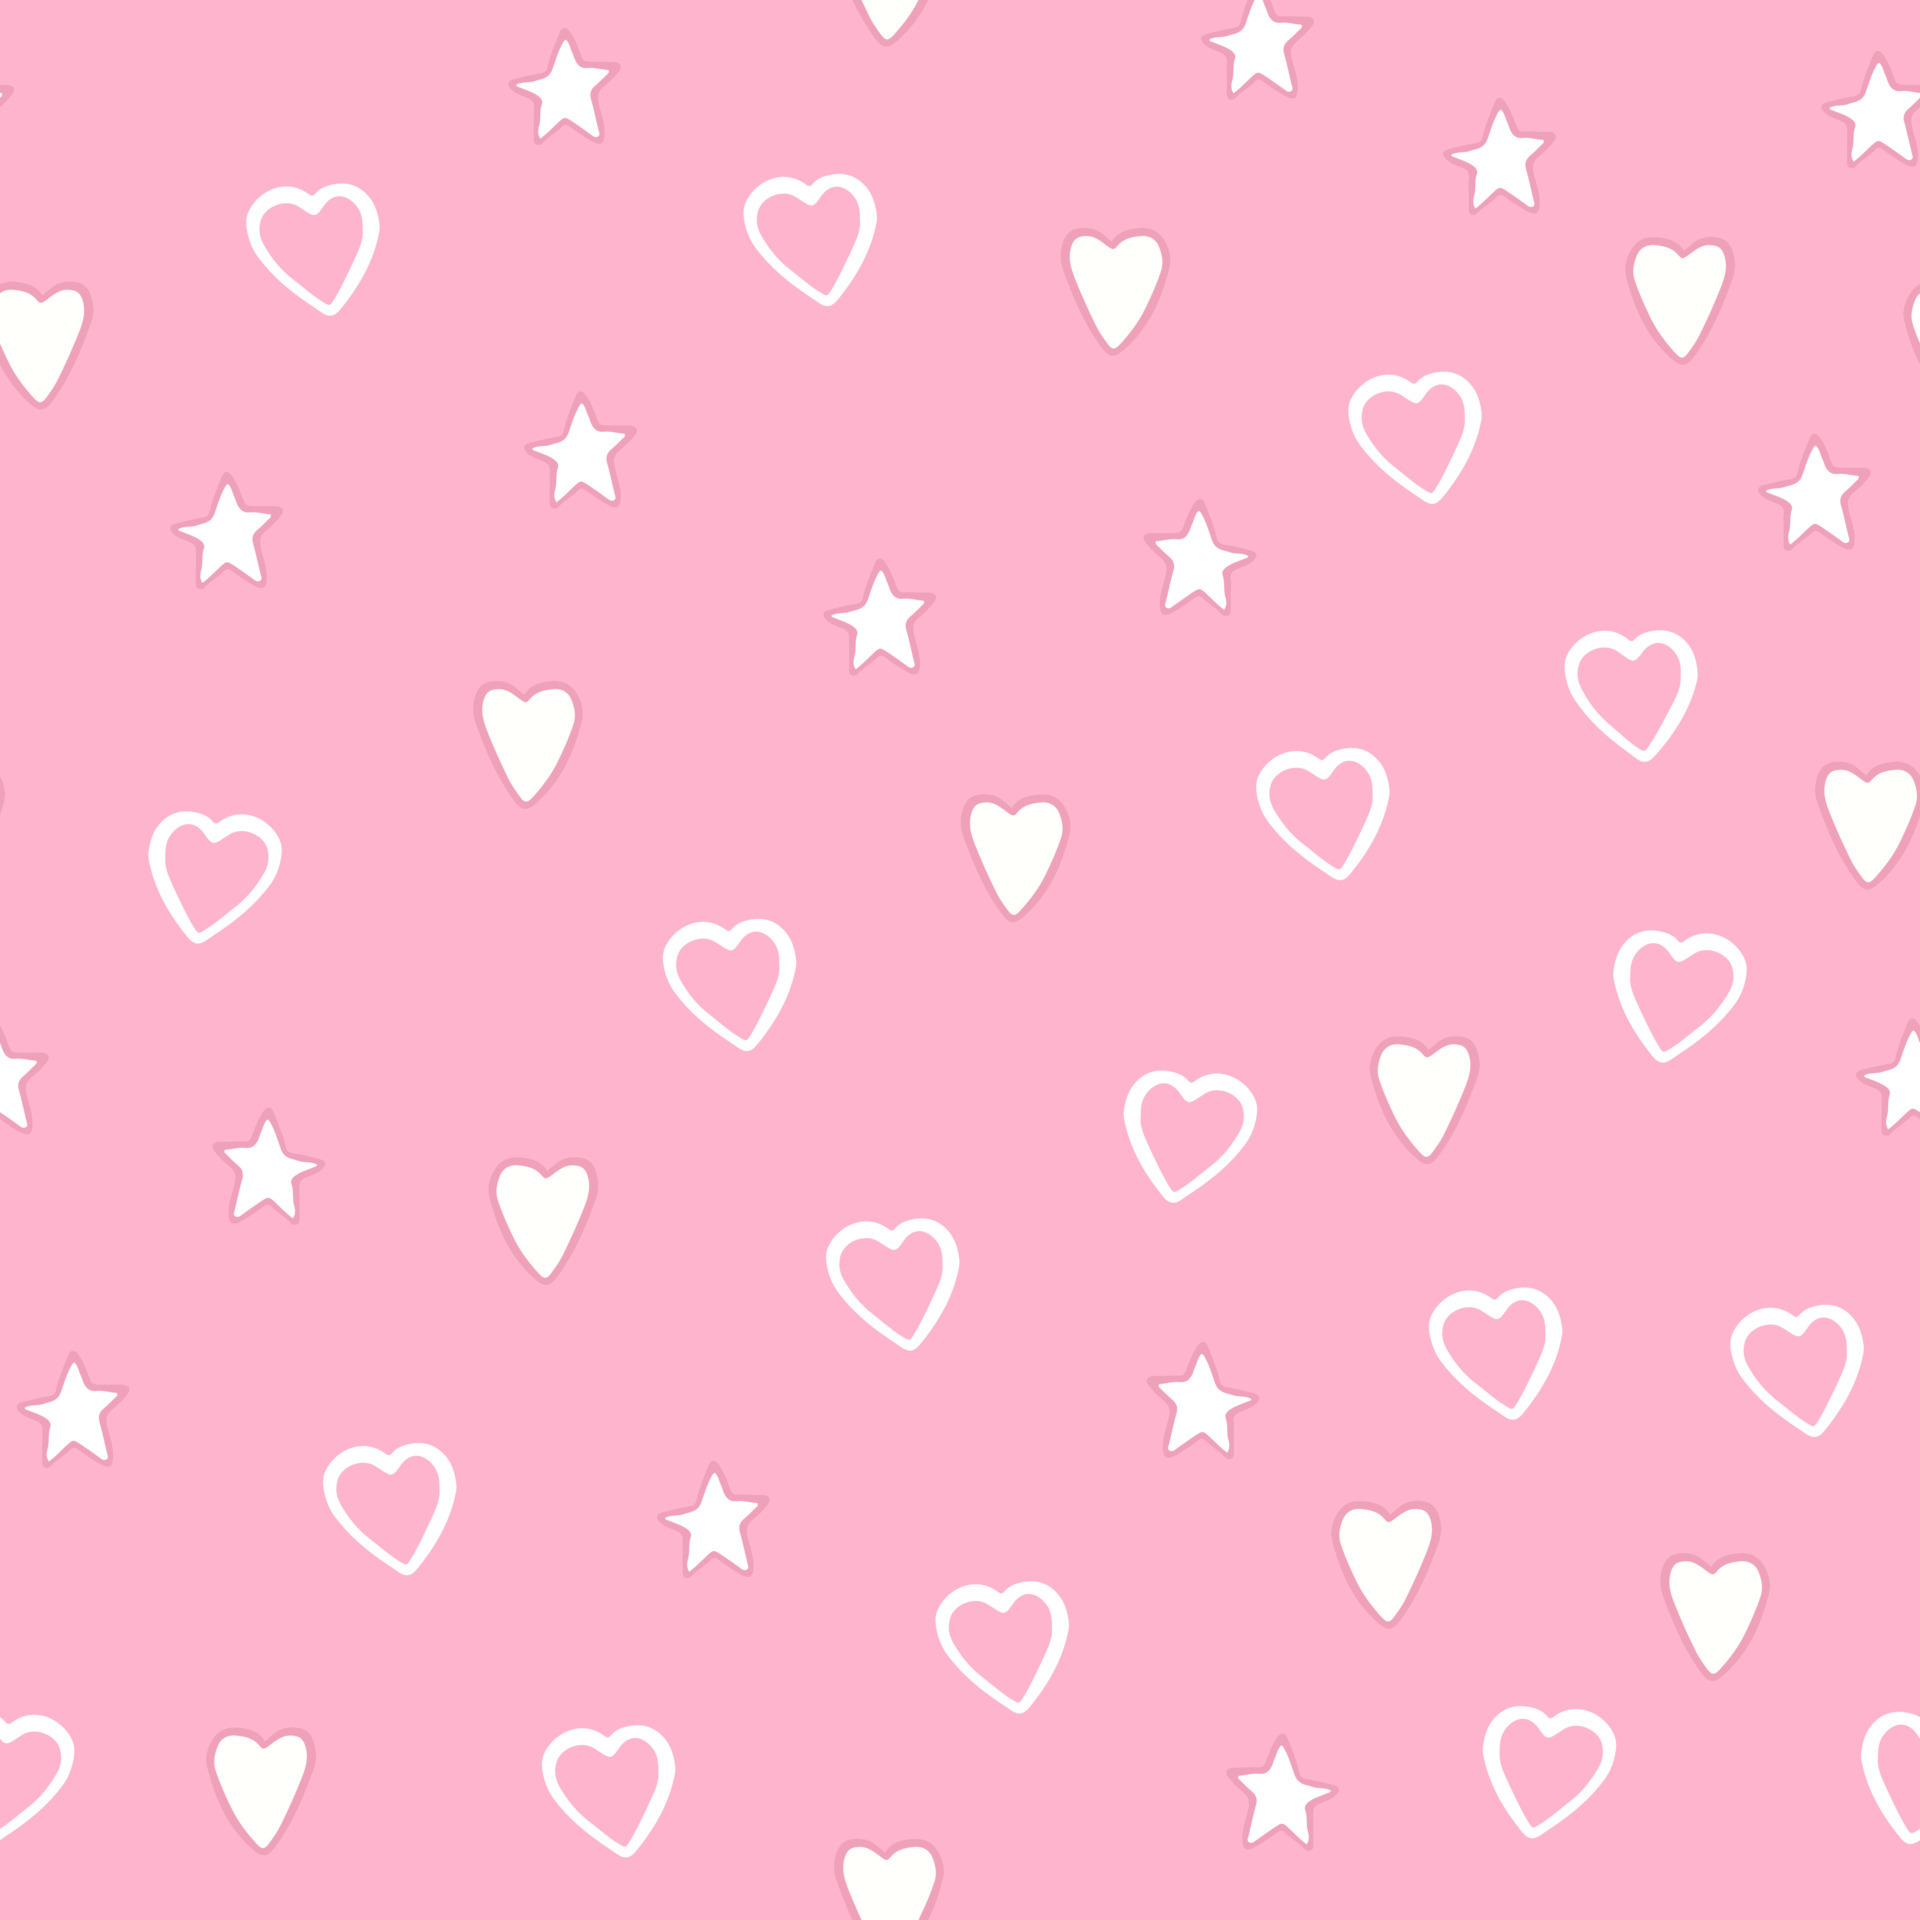 Pink Simple Heart Background Design Wallpaper Image For Free Download   Pngtree  Pink heart background Pink wallpaper backgrounds Heart  background